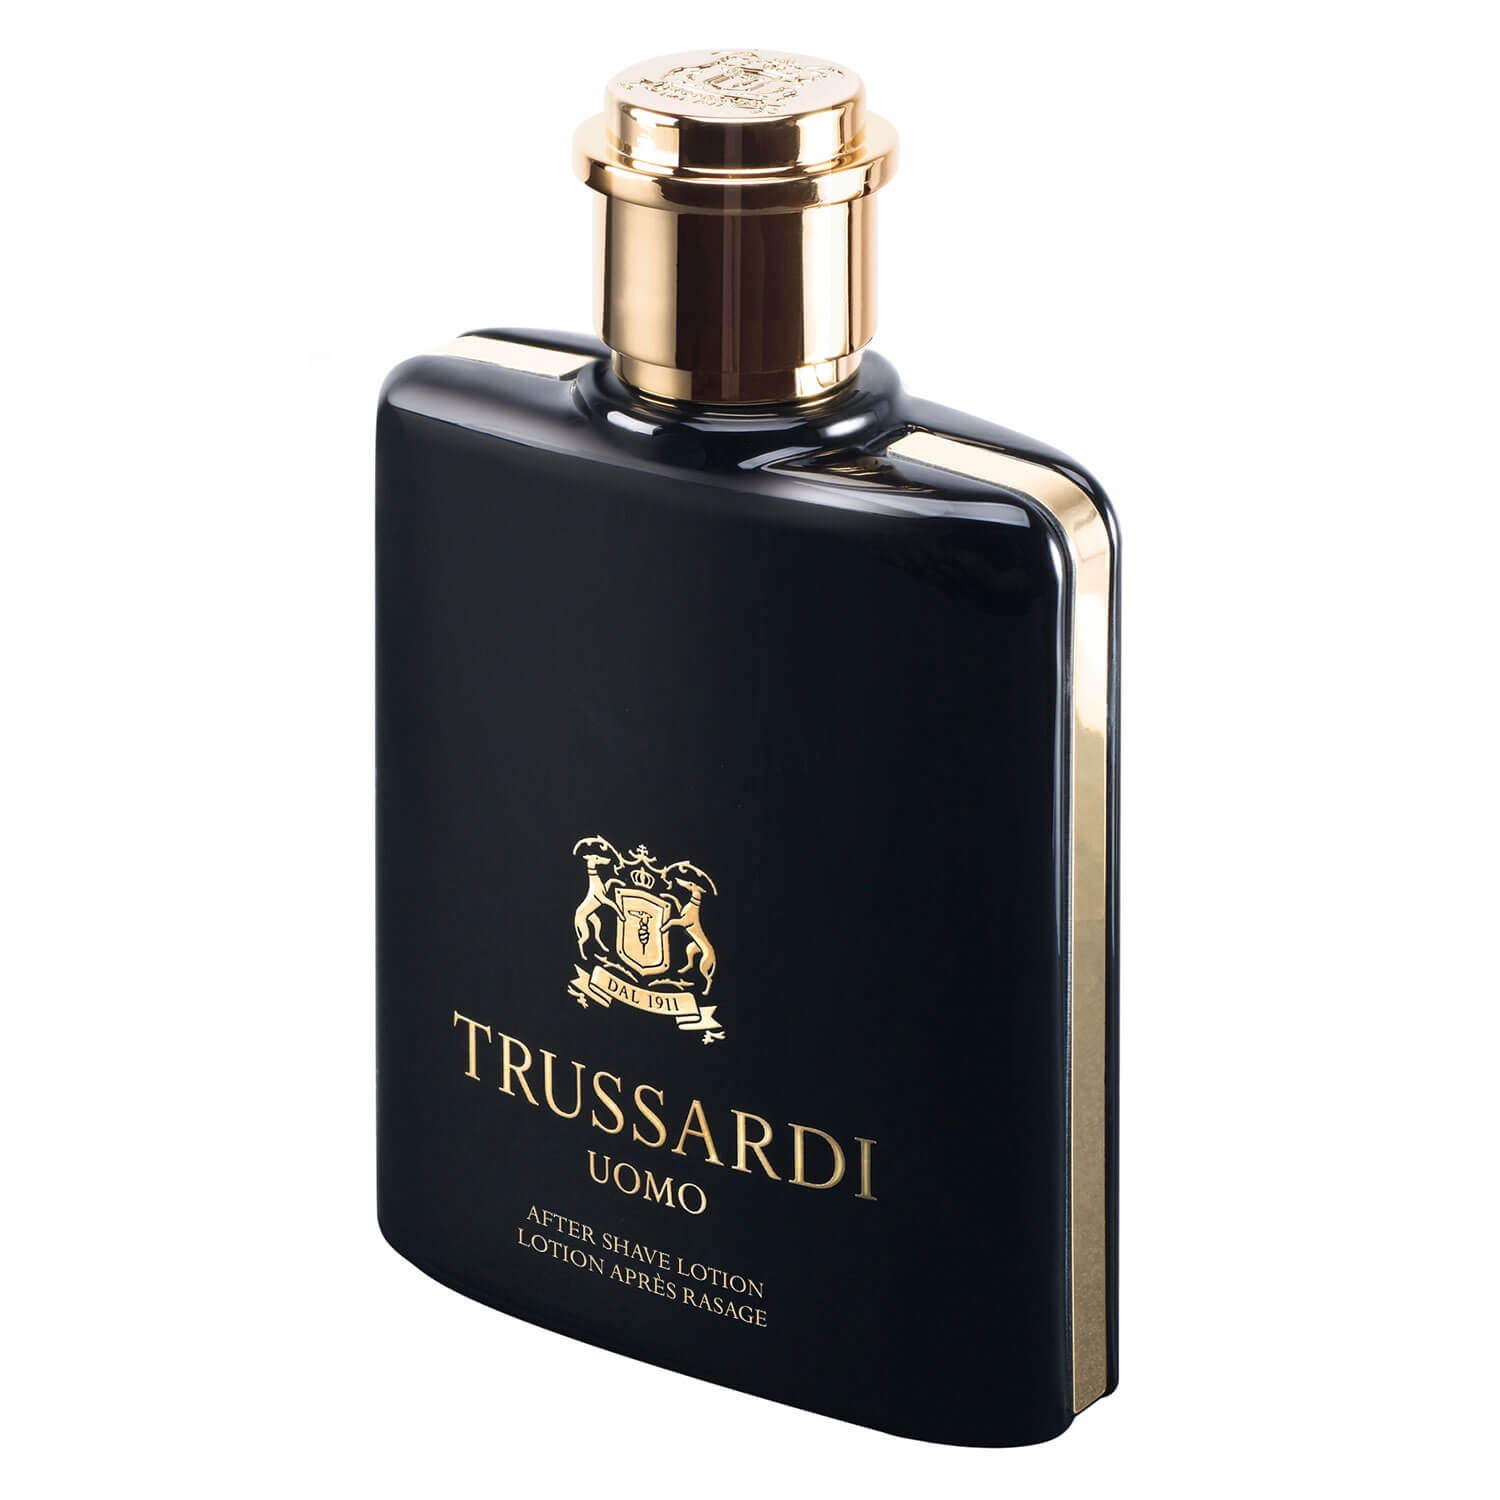 Product image from Trussardi Uomo - After Shave Lotion